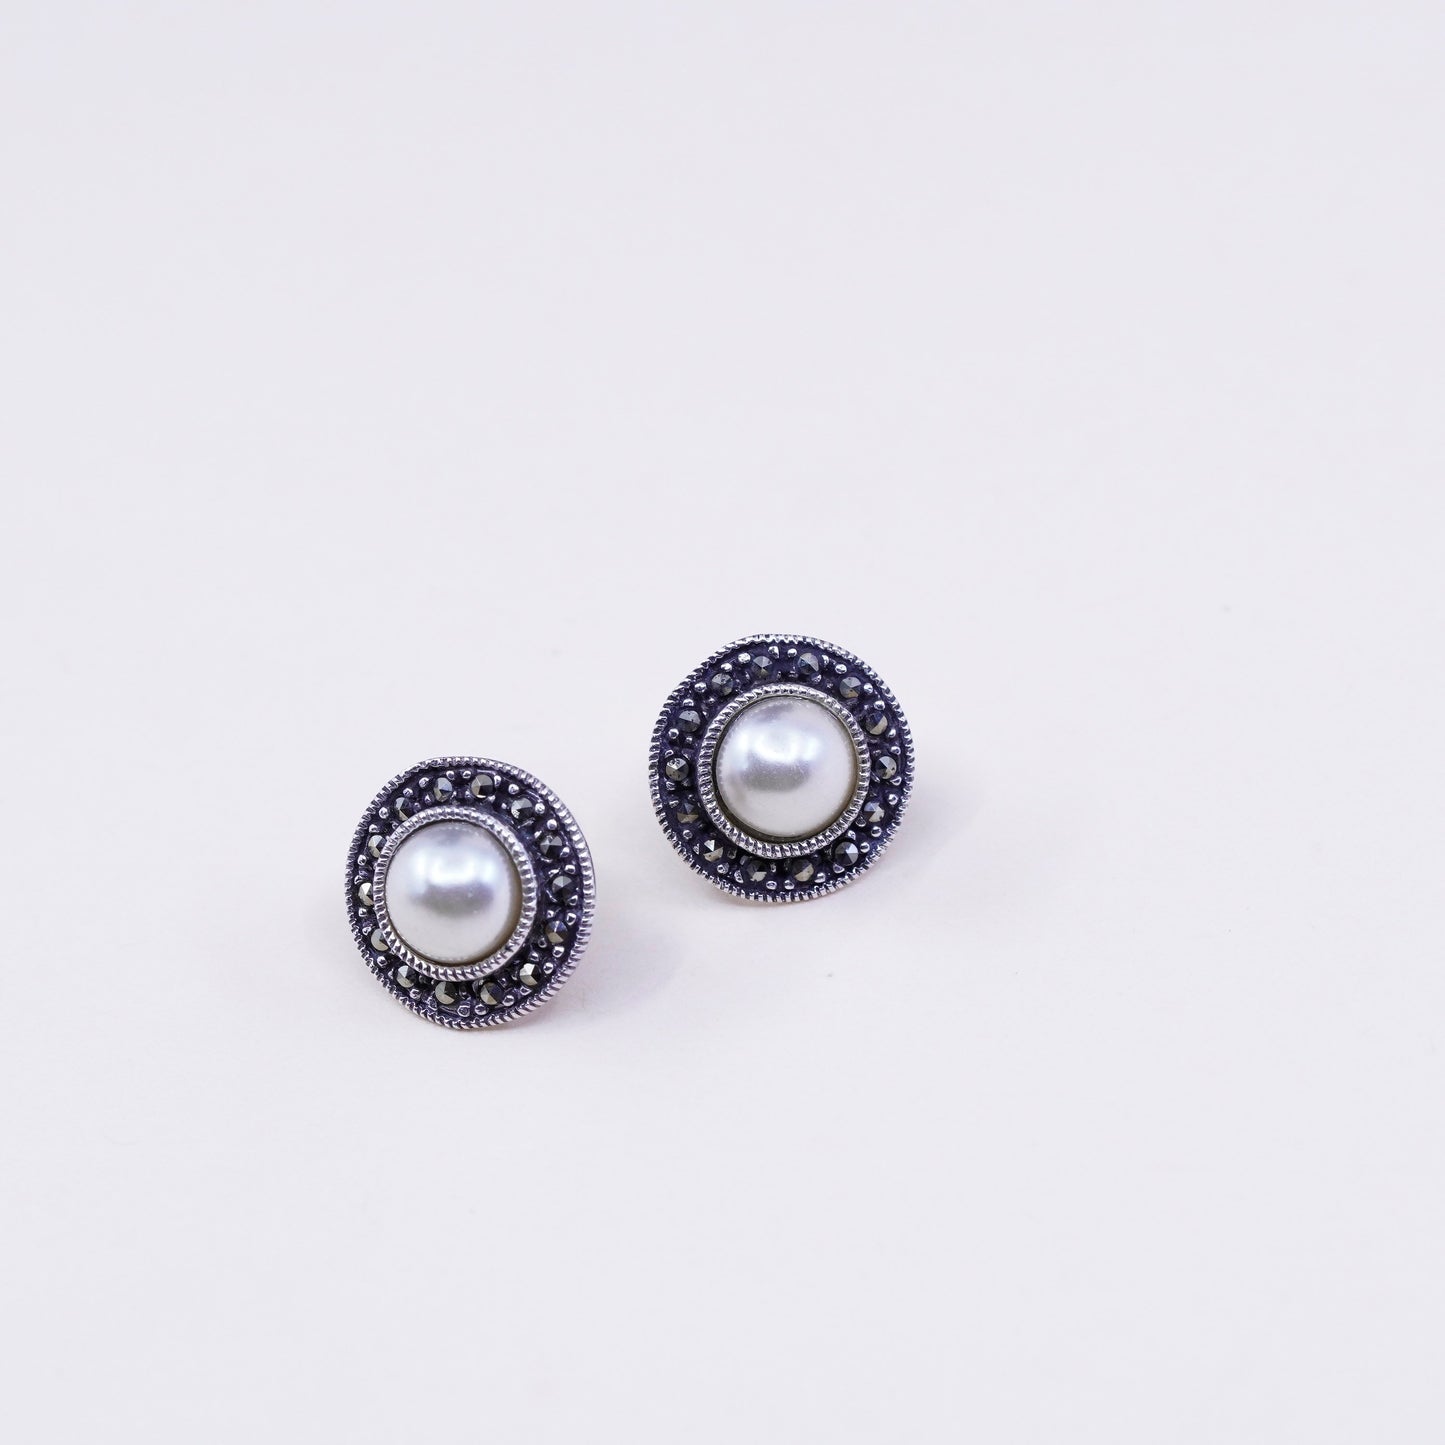 Vintage sterling silver earrings, 925 square studs with pearl and marcasite